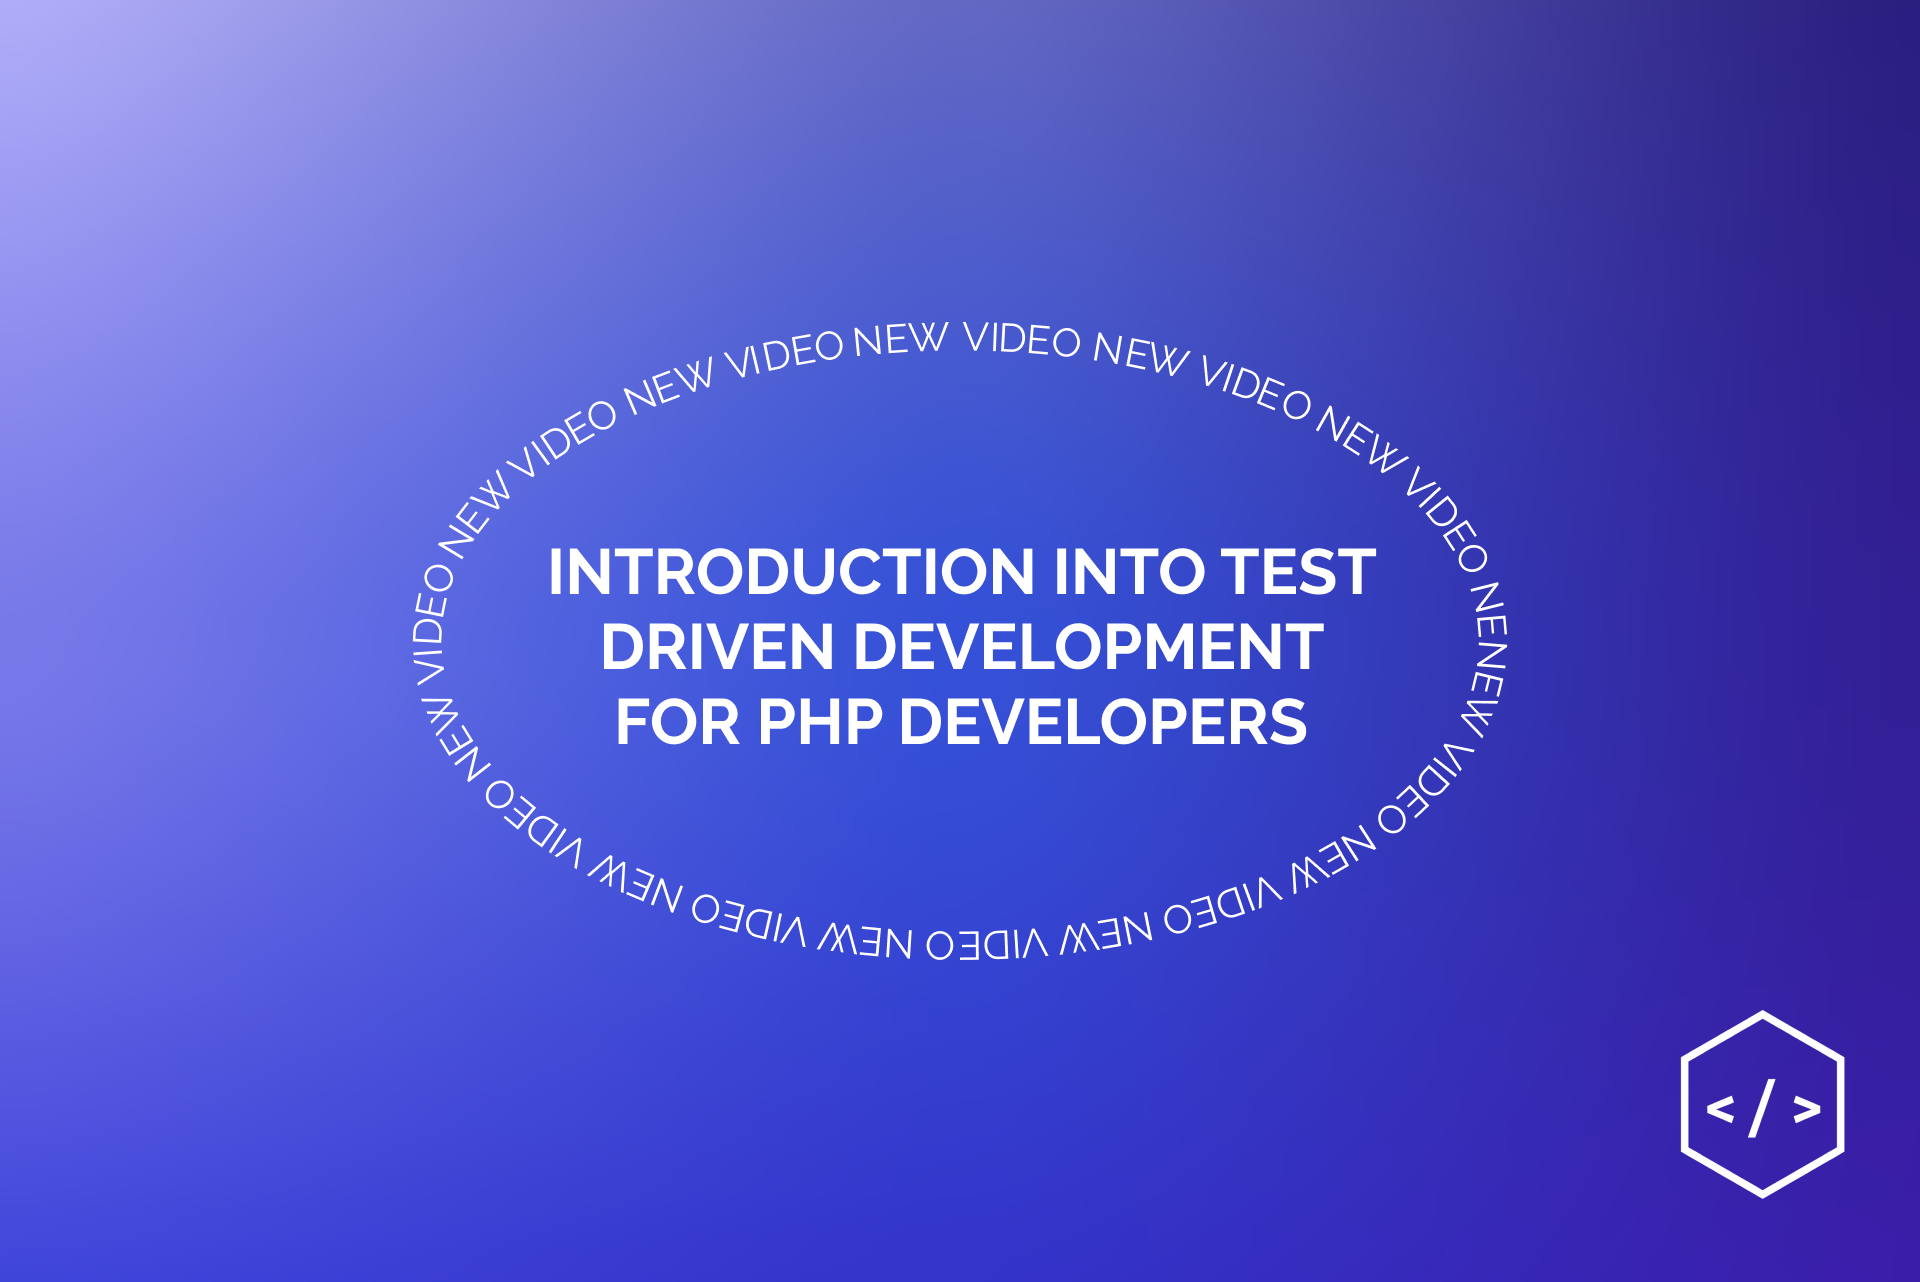 Introduction to Test Driven Development for PHP Developers